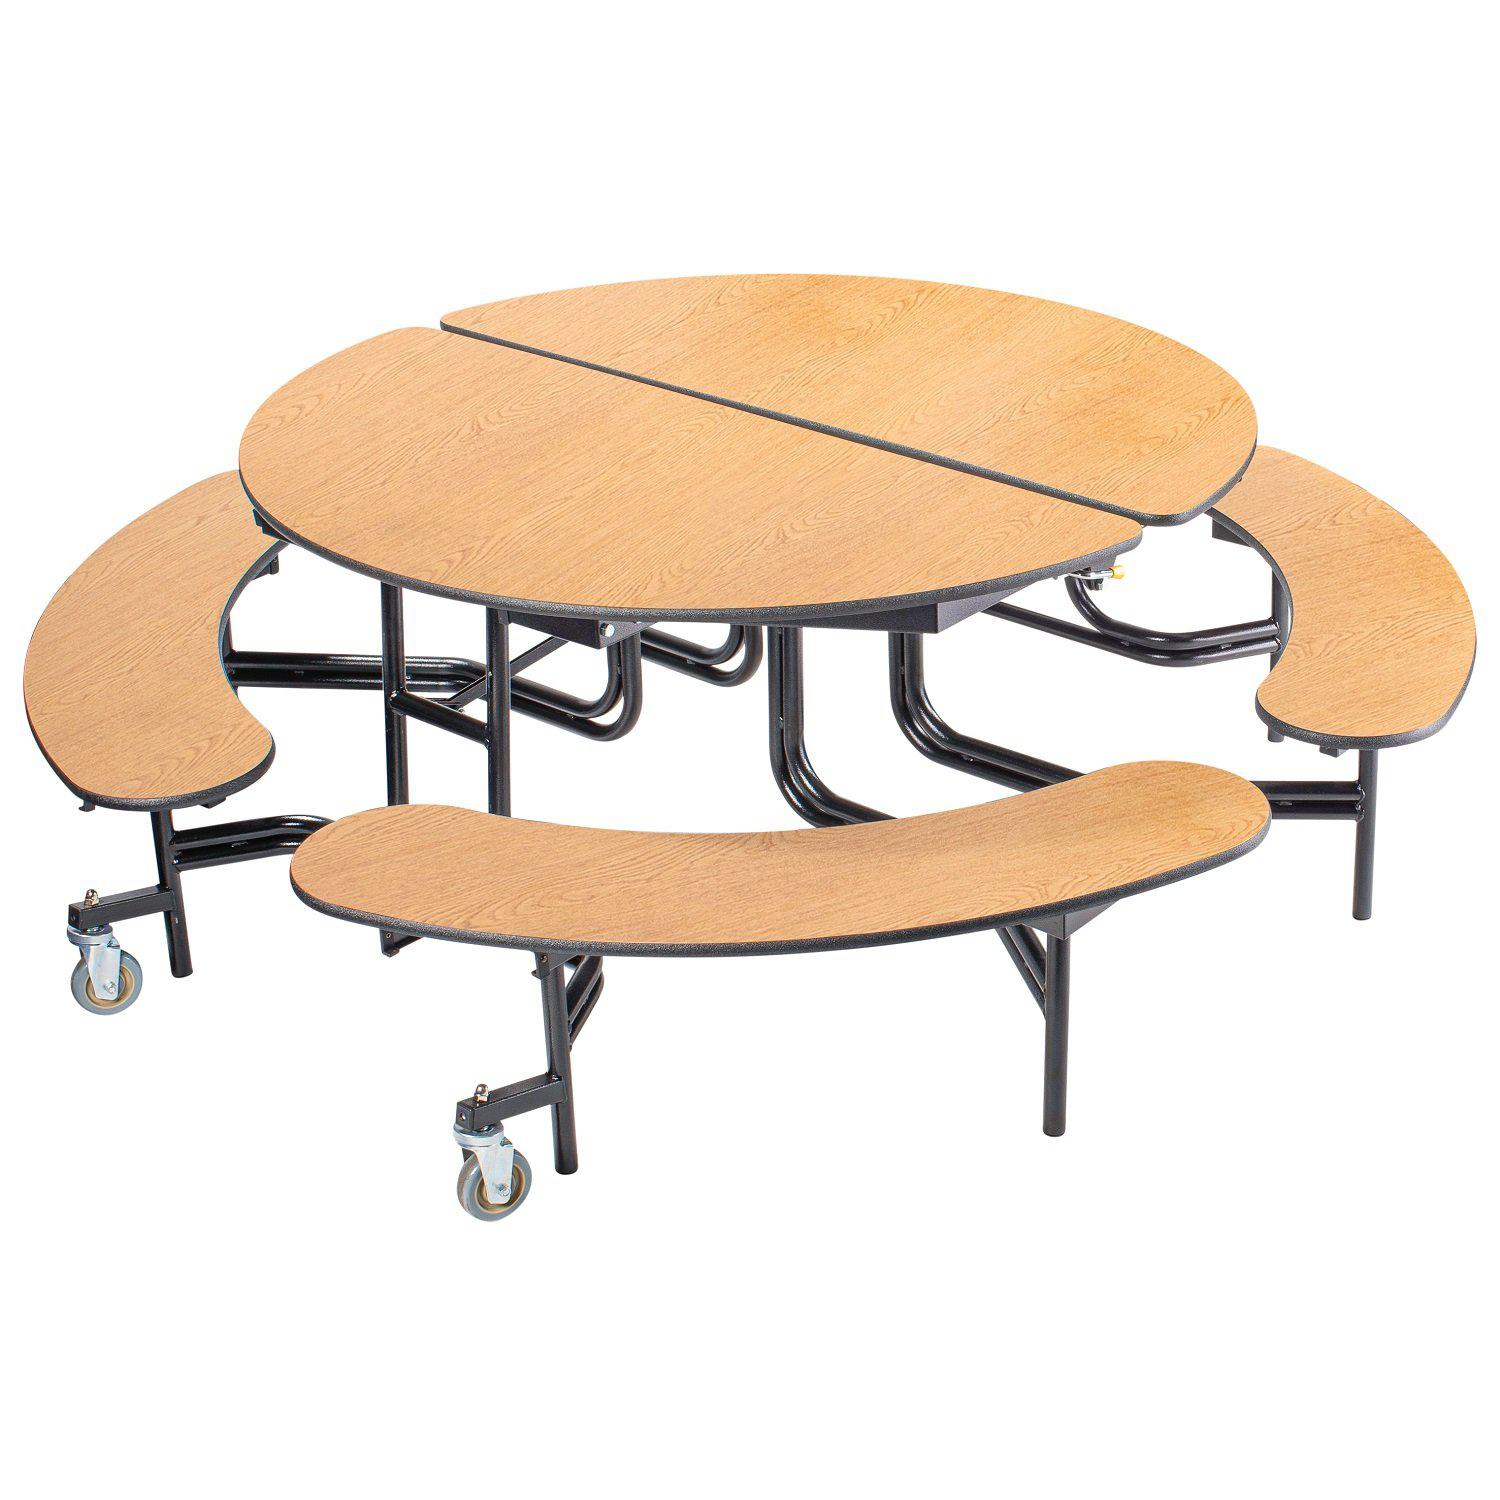 Mobile Cafeteria Table with Benches, 60" Round, MDF Core, Black ProtectEdge, Textured Black Frame